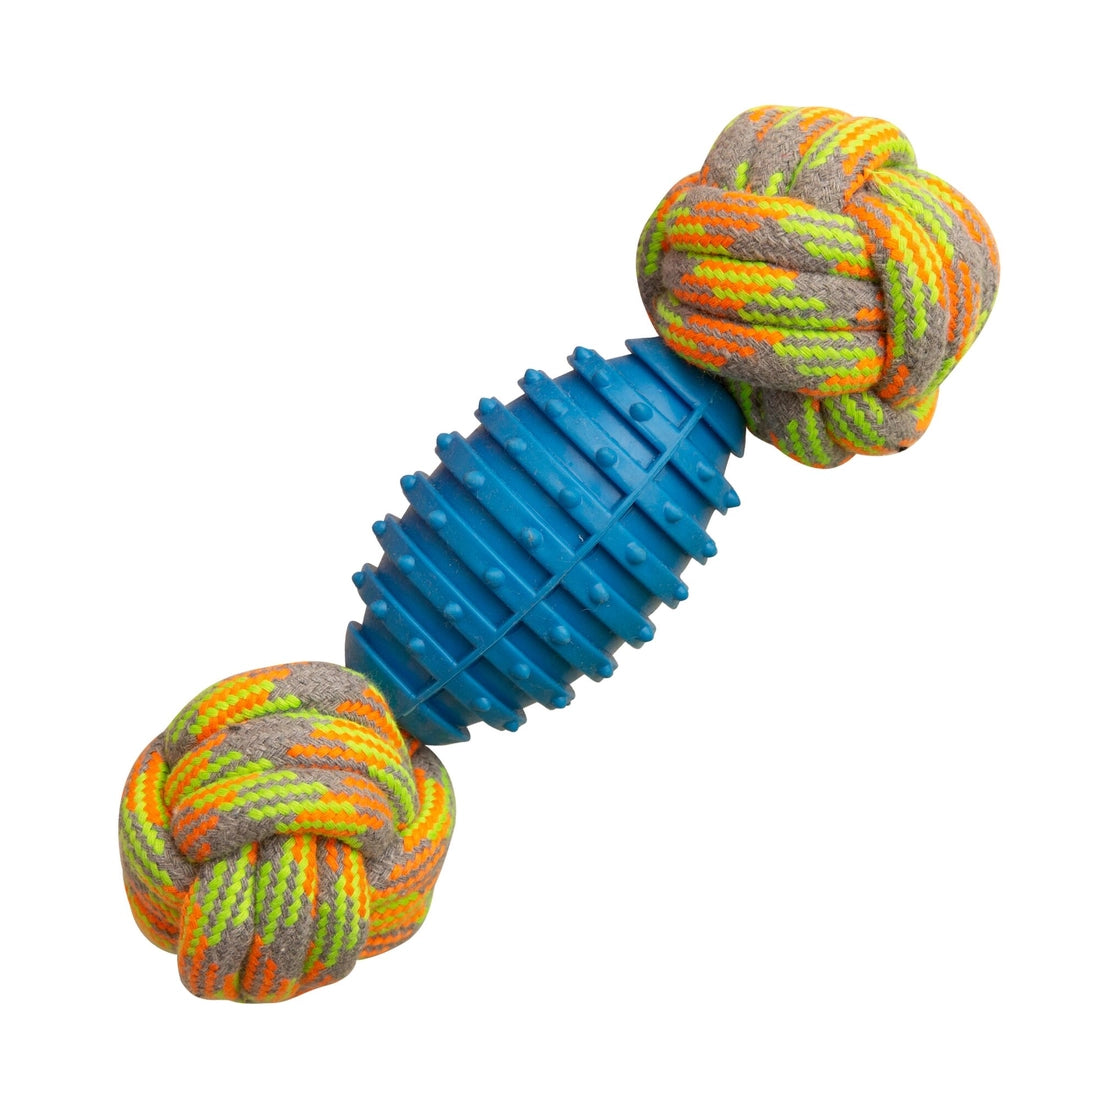 blue rubber dog toy with two green, orange, and grey rope knot balls on each end